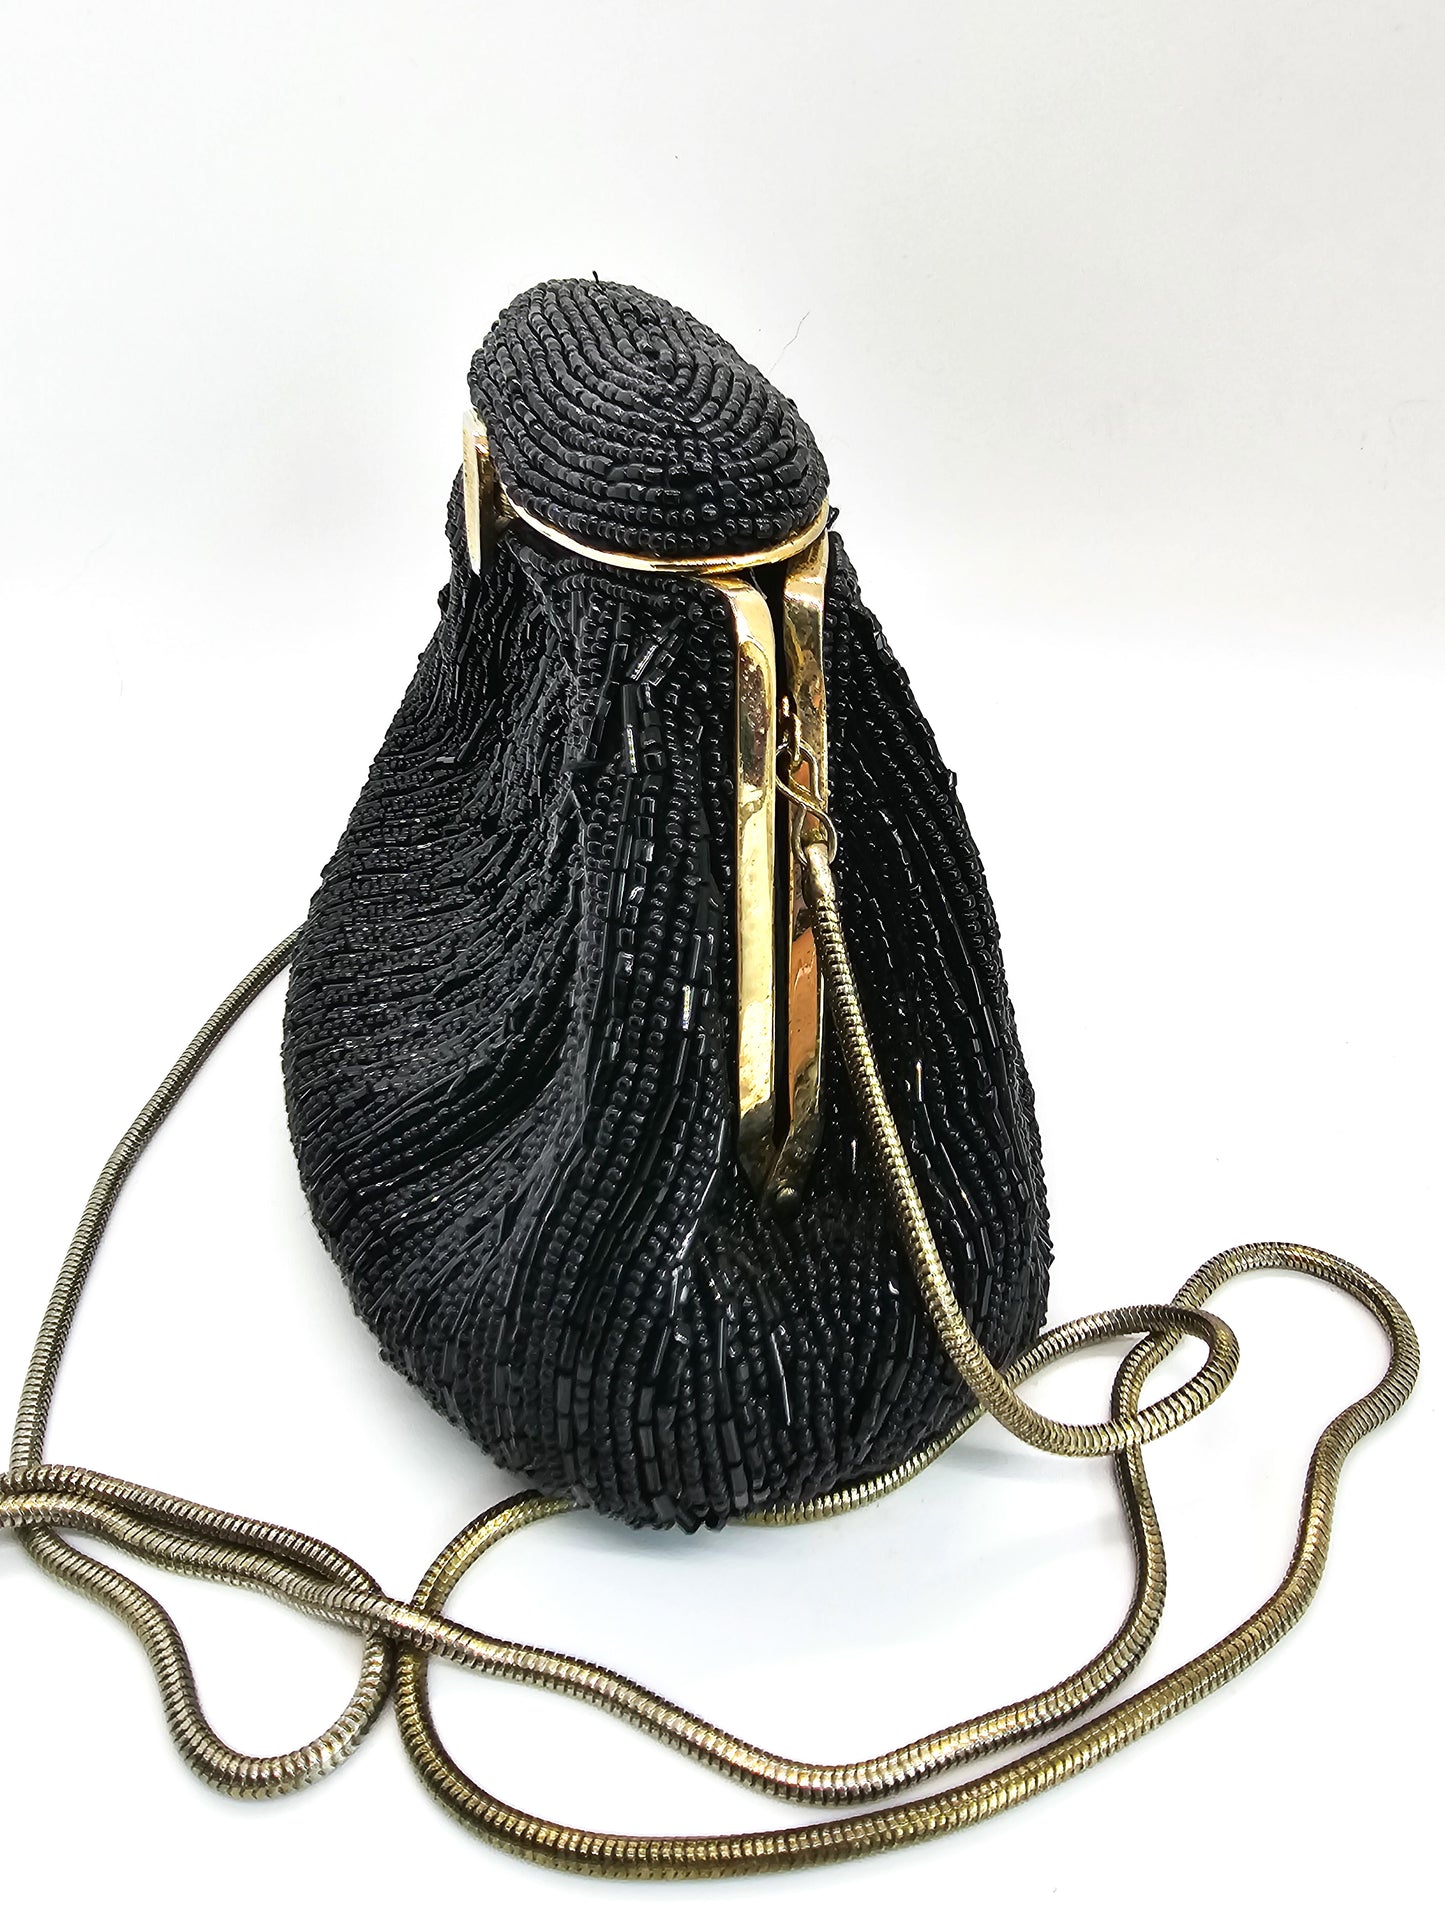 Walborg vintage French black and gold beaded evening bag purse